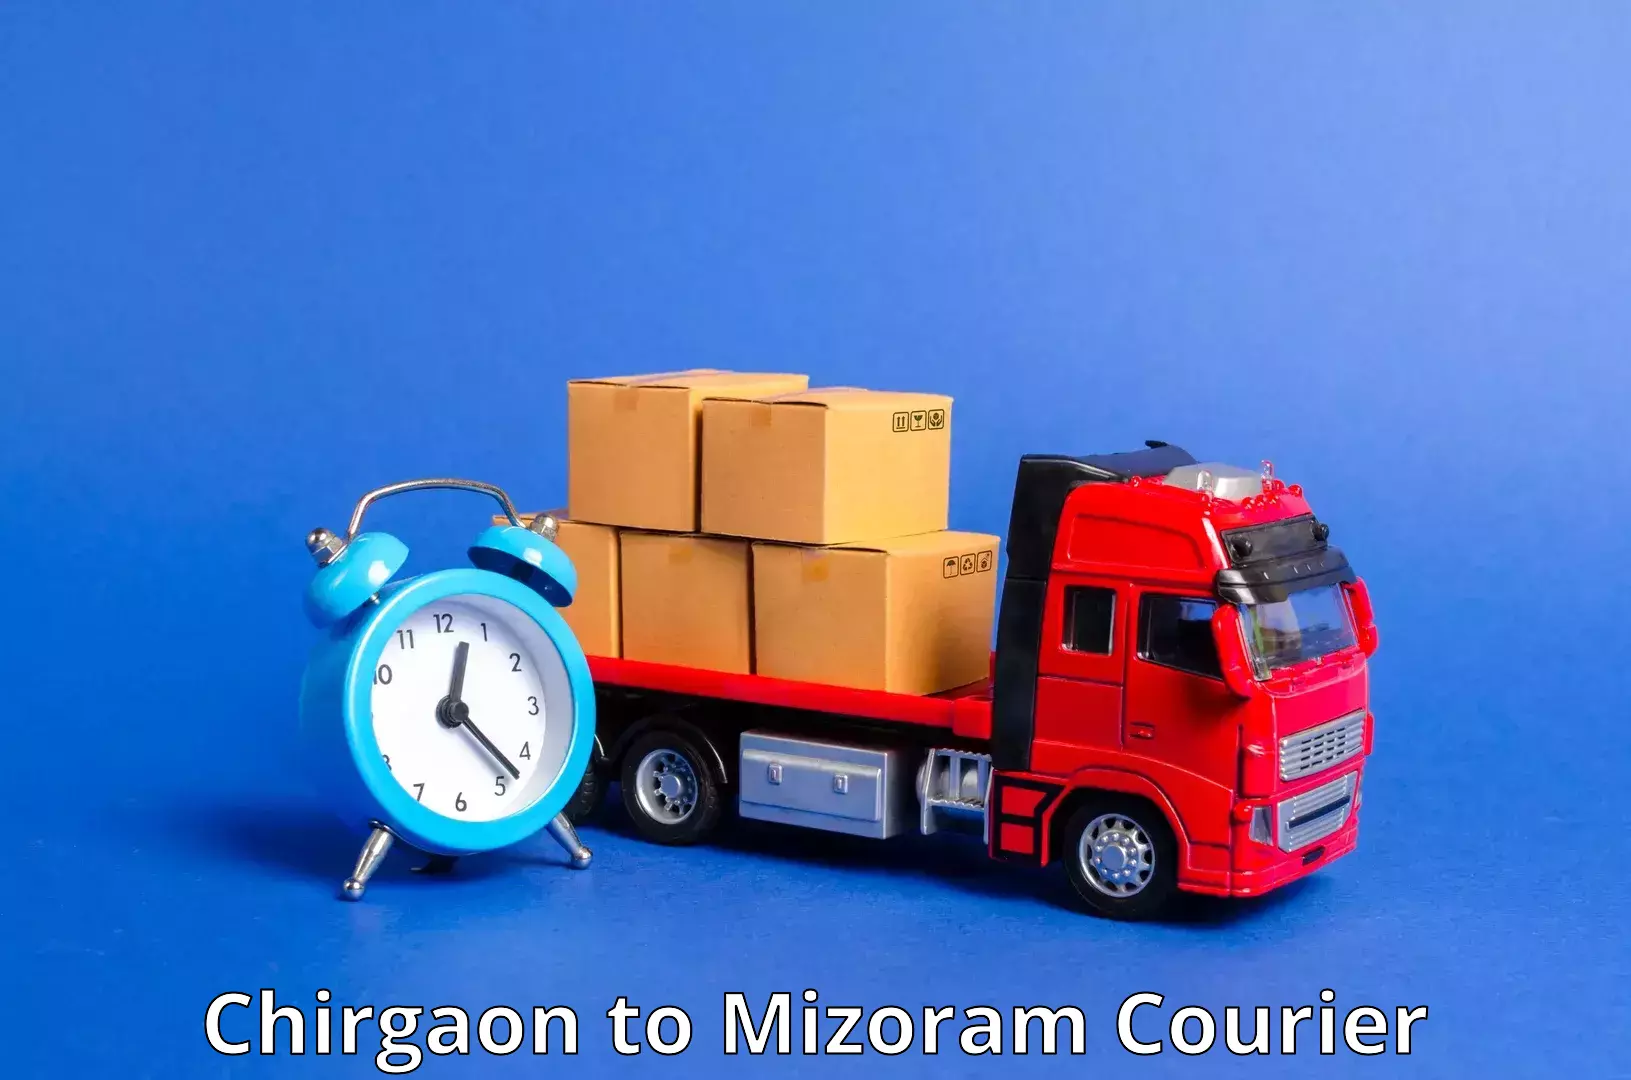 Reliable package handling Chirgaon to Aizawl